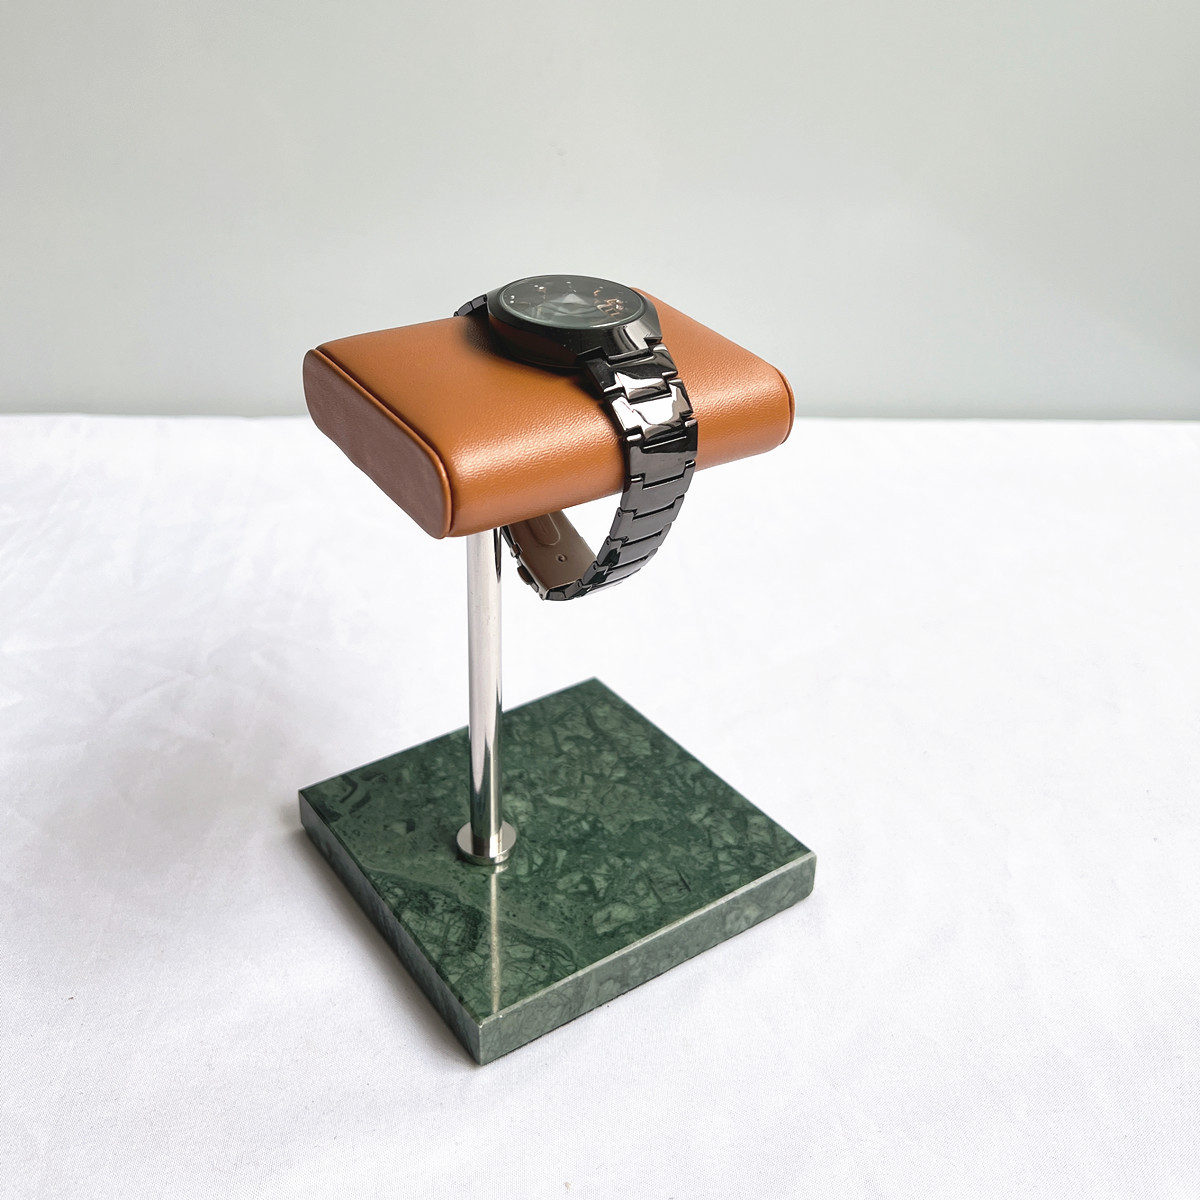 A great, cheap watch stand! WatchPod Watch Display Stand Review - YouTube